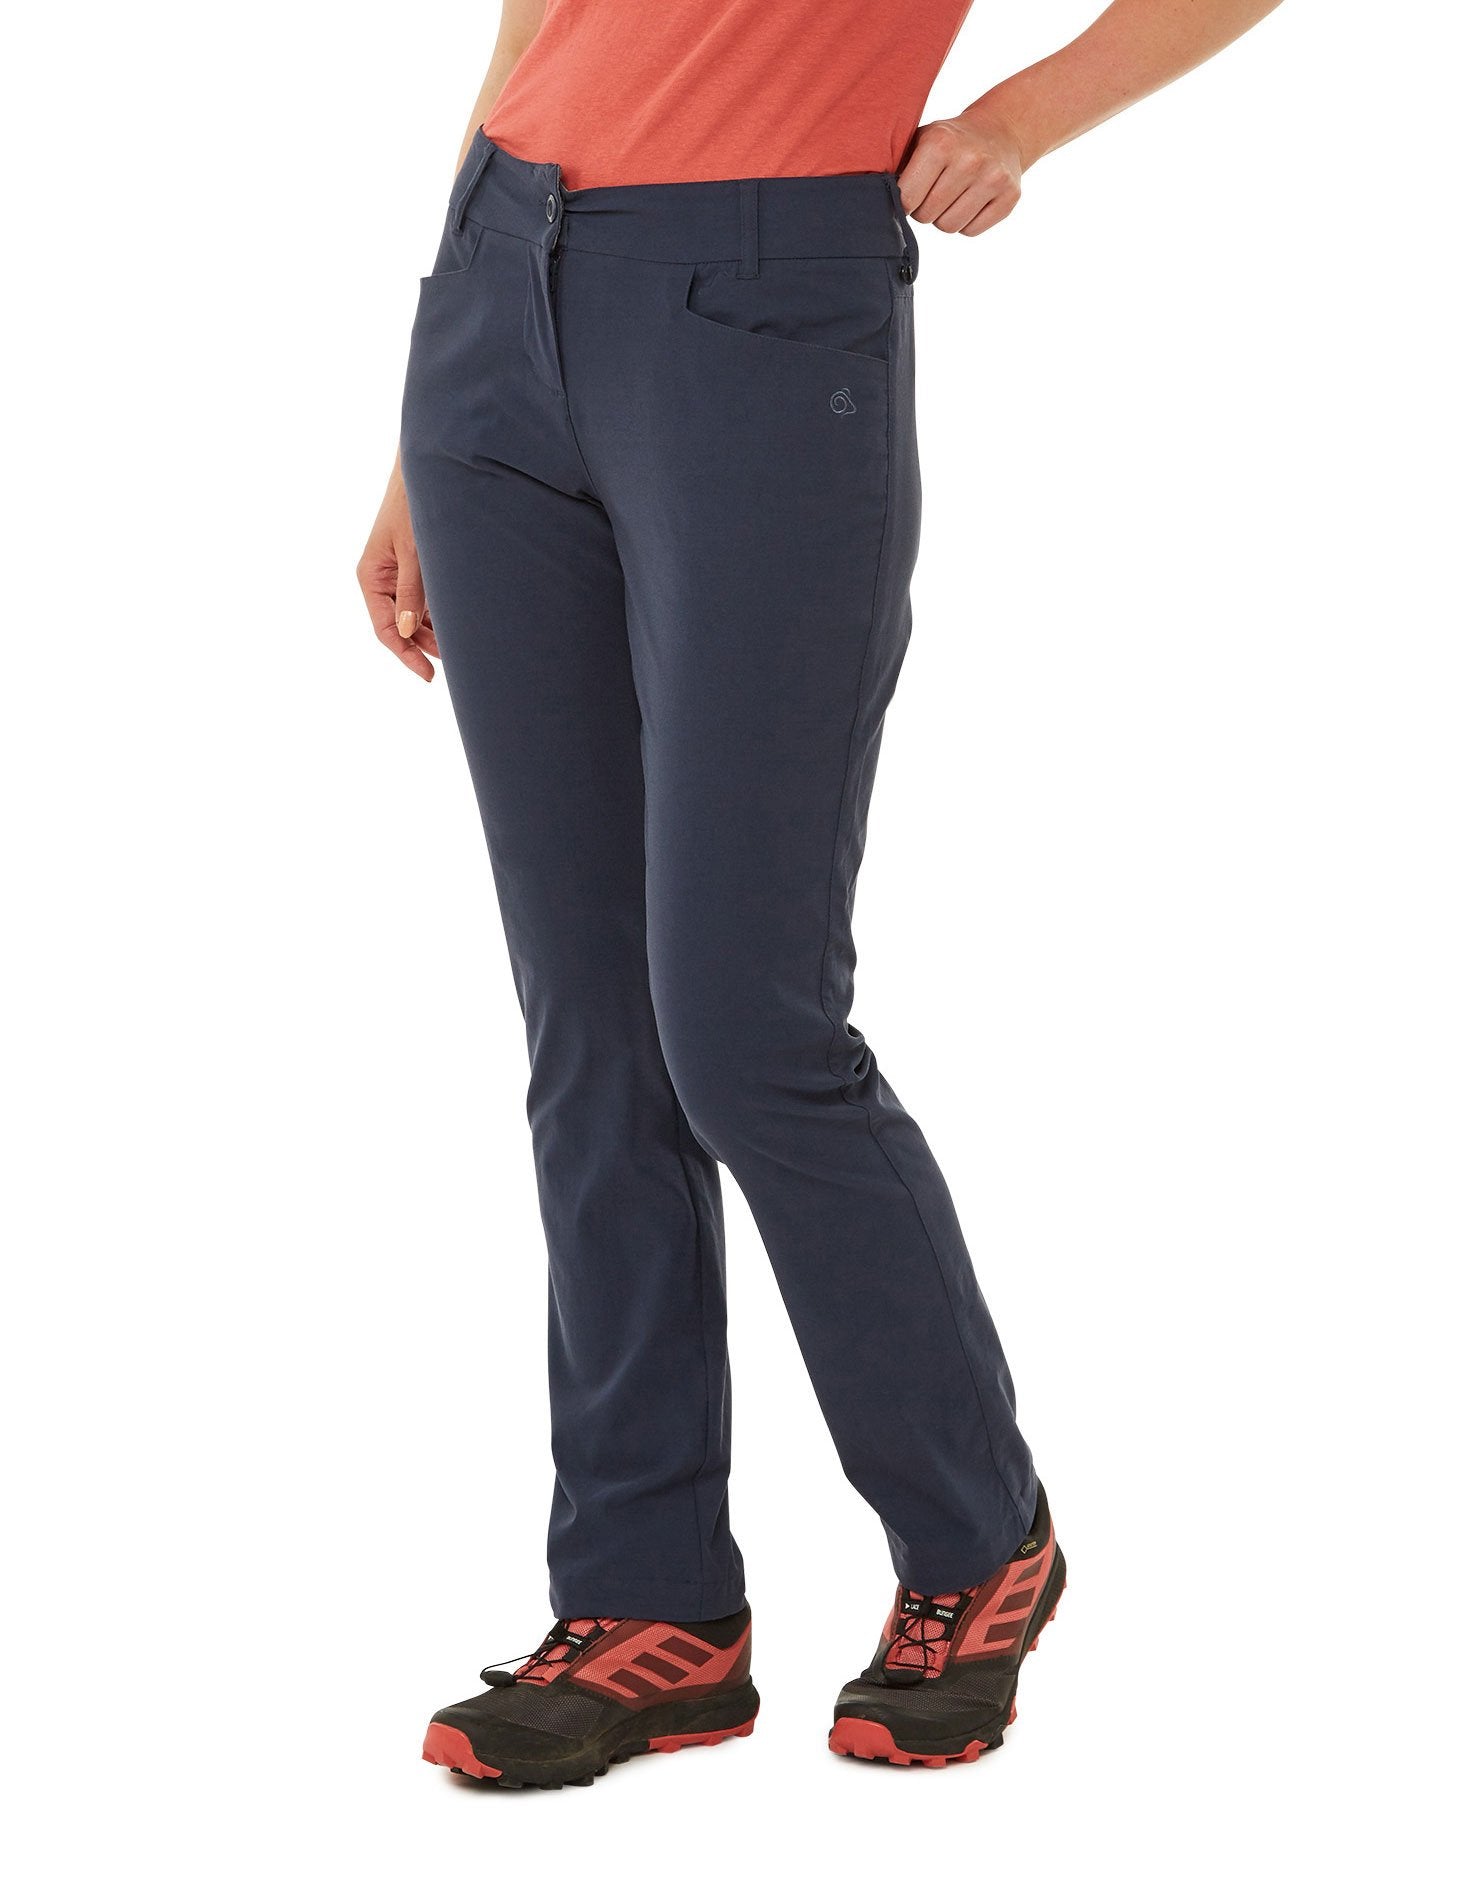 Ladies Clara NosiLife Trouser by Craghoppers